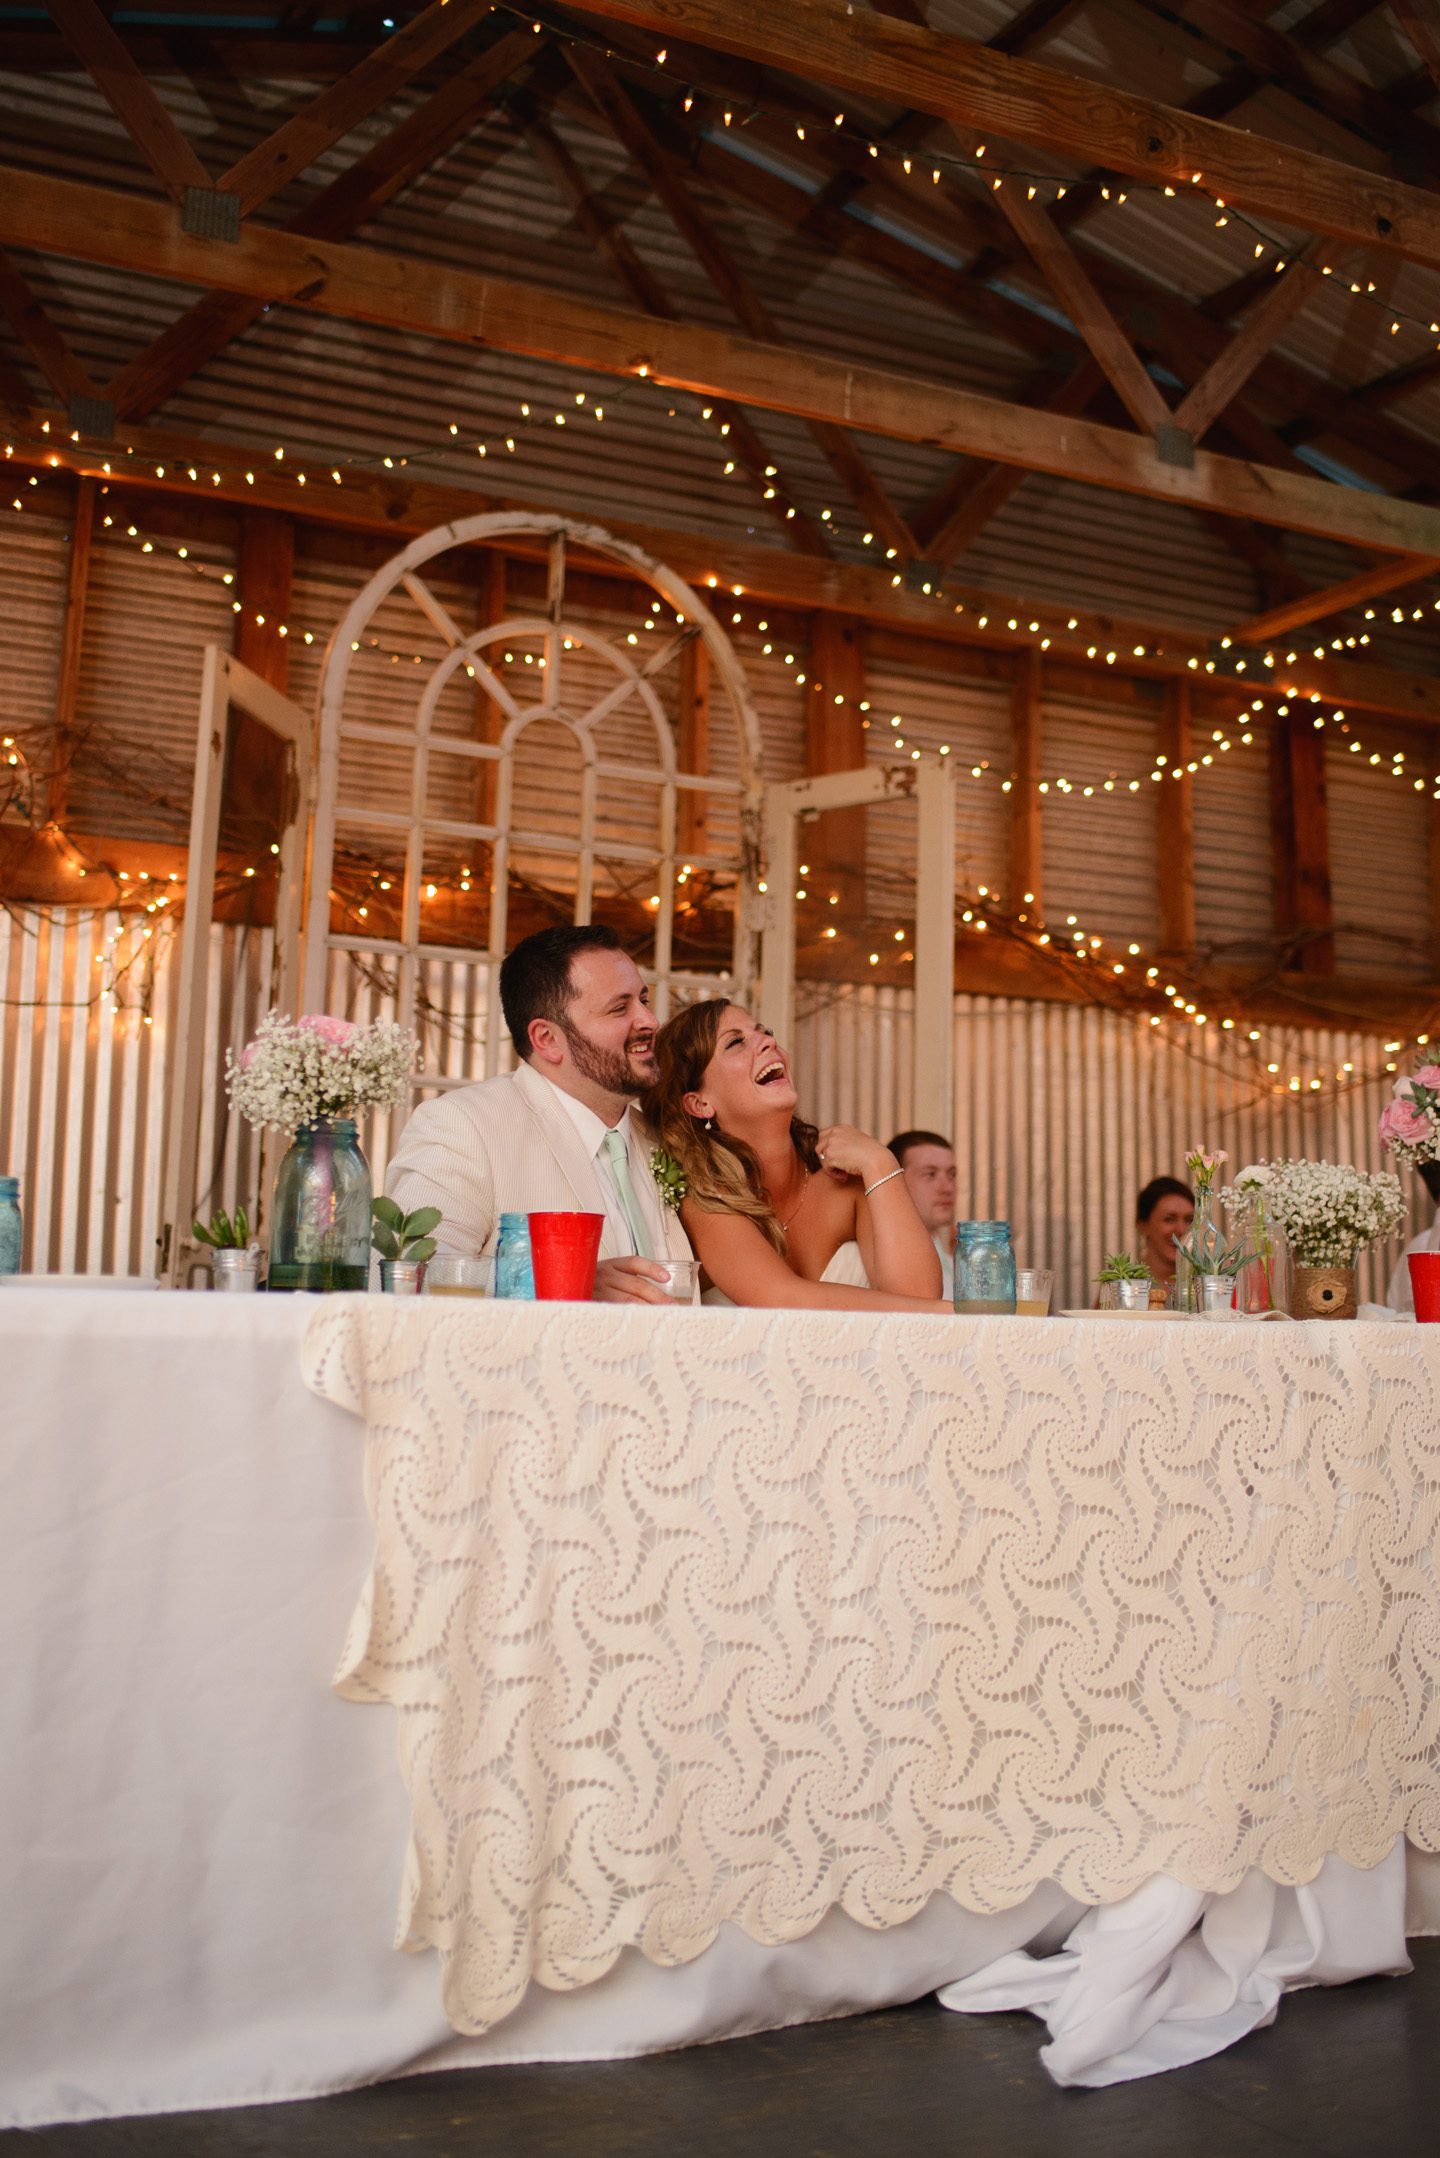 Kelly and Nathan by Neil GT Photography Sinkland Farms Christiansburg VA Wedding Toast Laughing